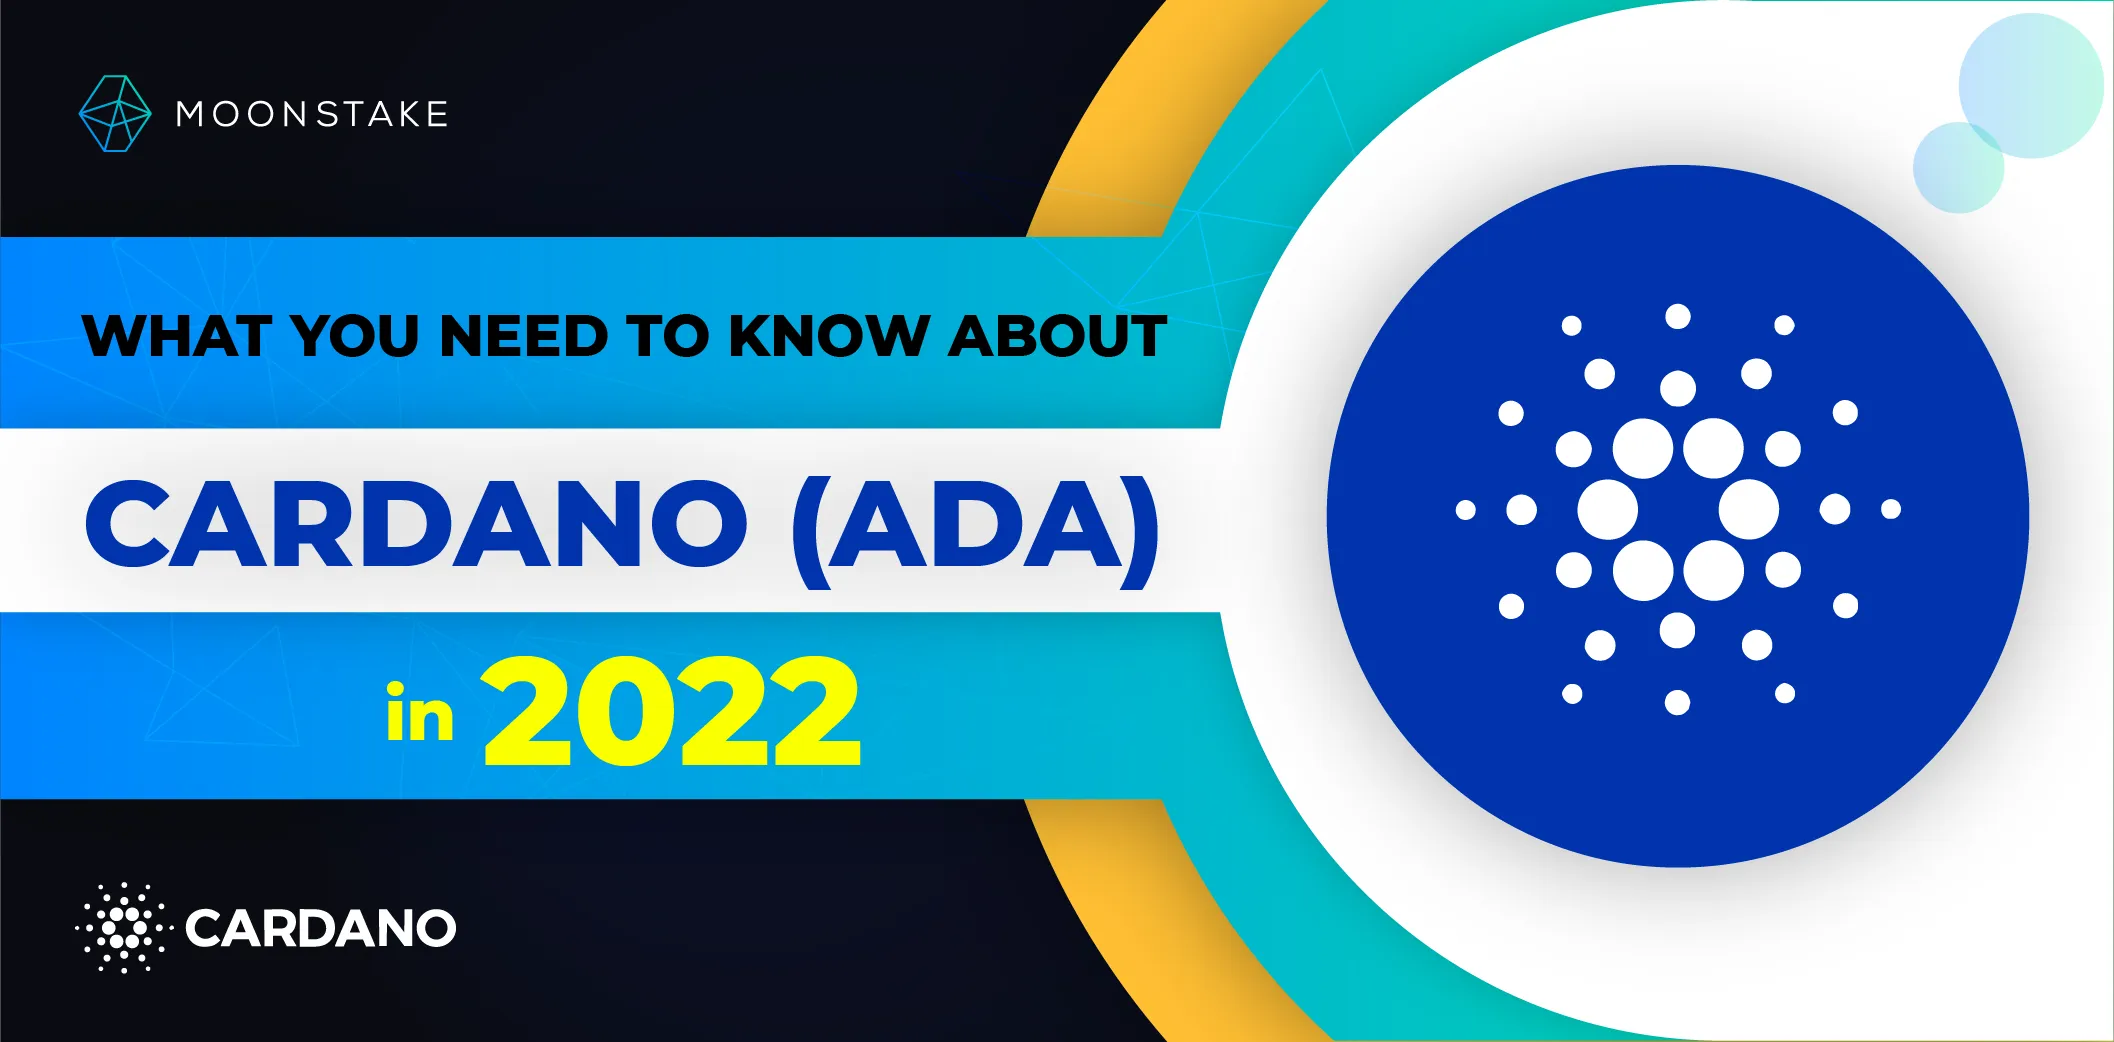 What to Expect from Cardano (ADA) in 2022